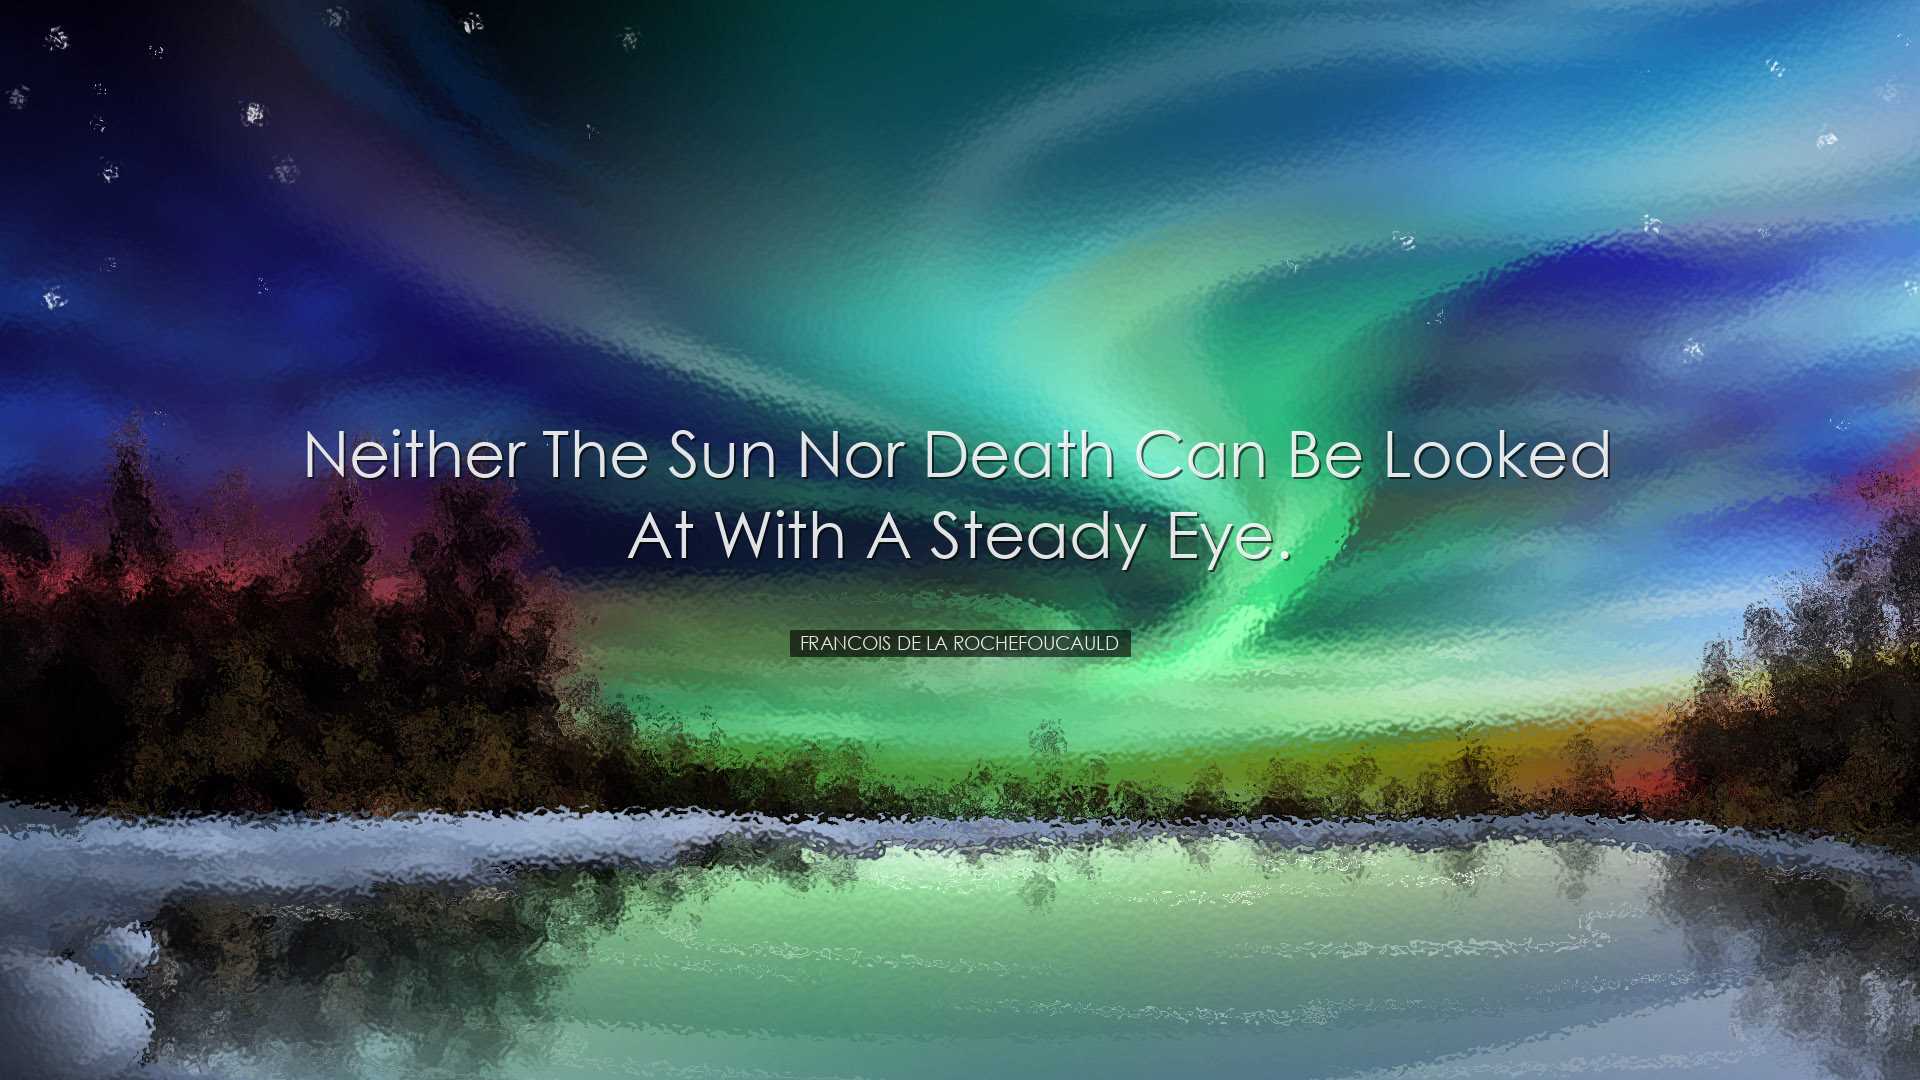 Neither the sun nor death can be looked at with a steady eye. - Fr